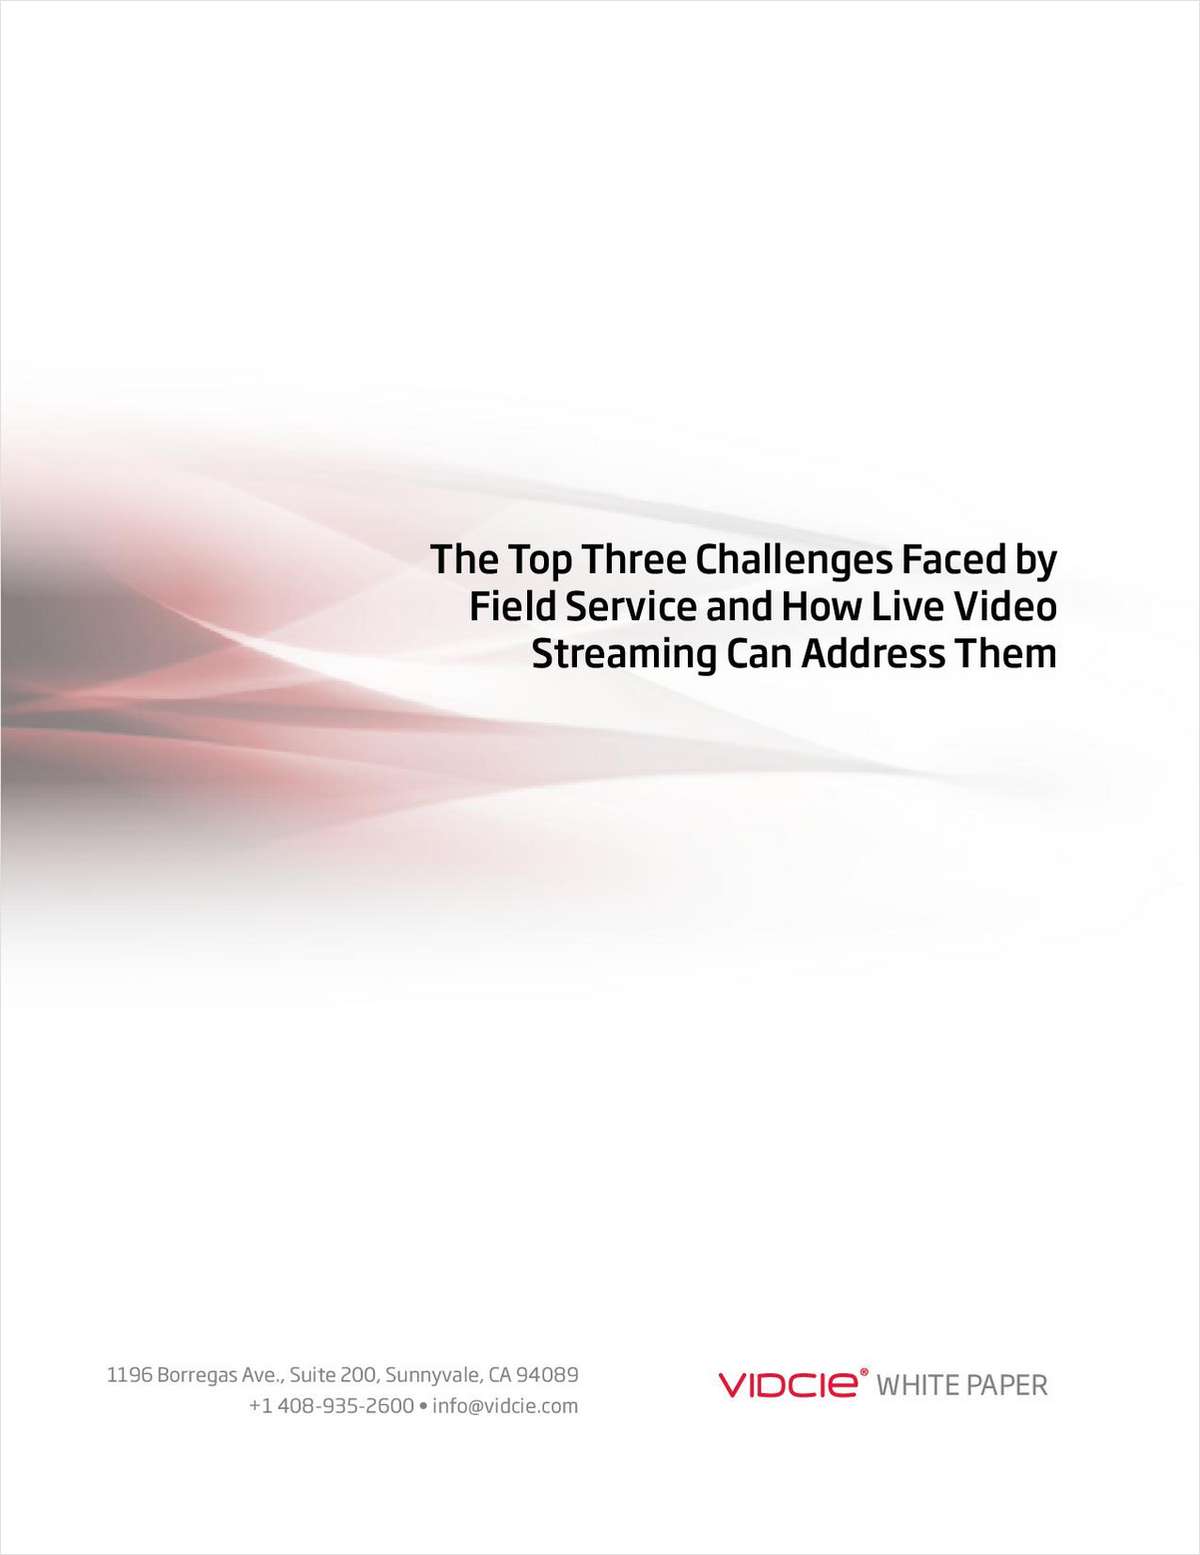 The Top Three Challenges Faced by Field Service and How Live Video Streaming Can Address Them